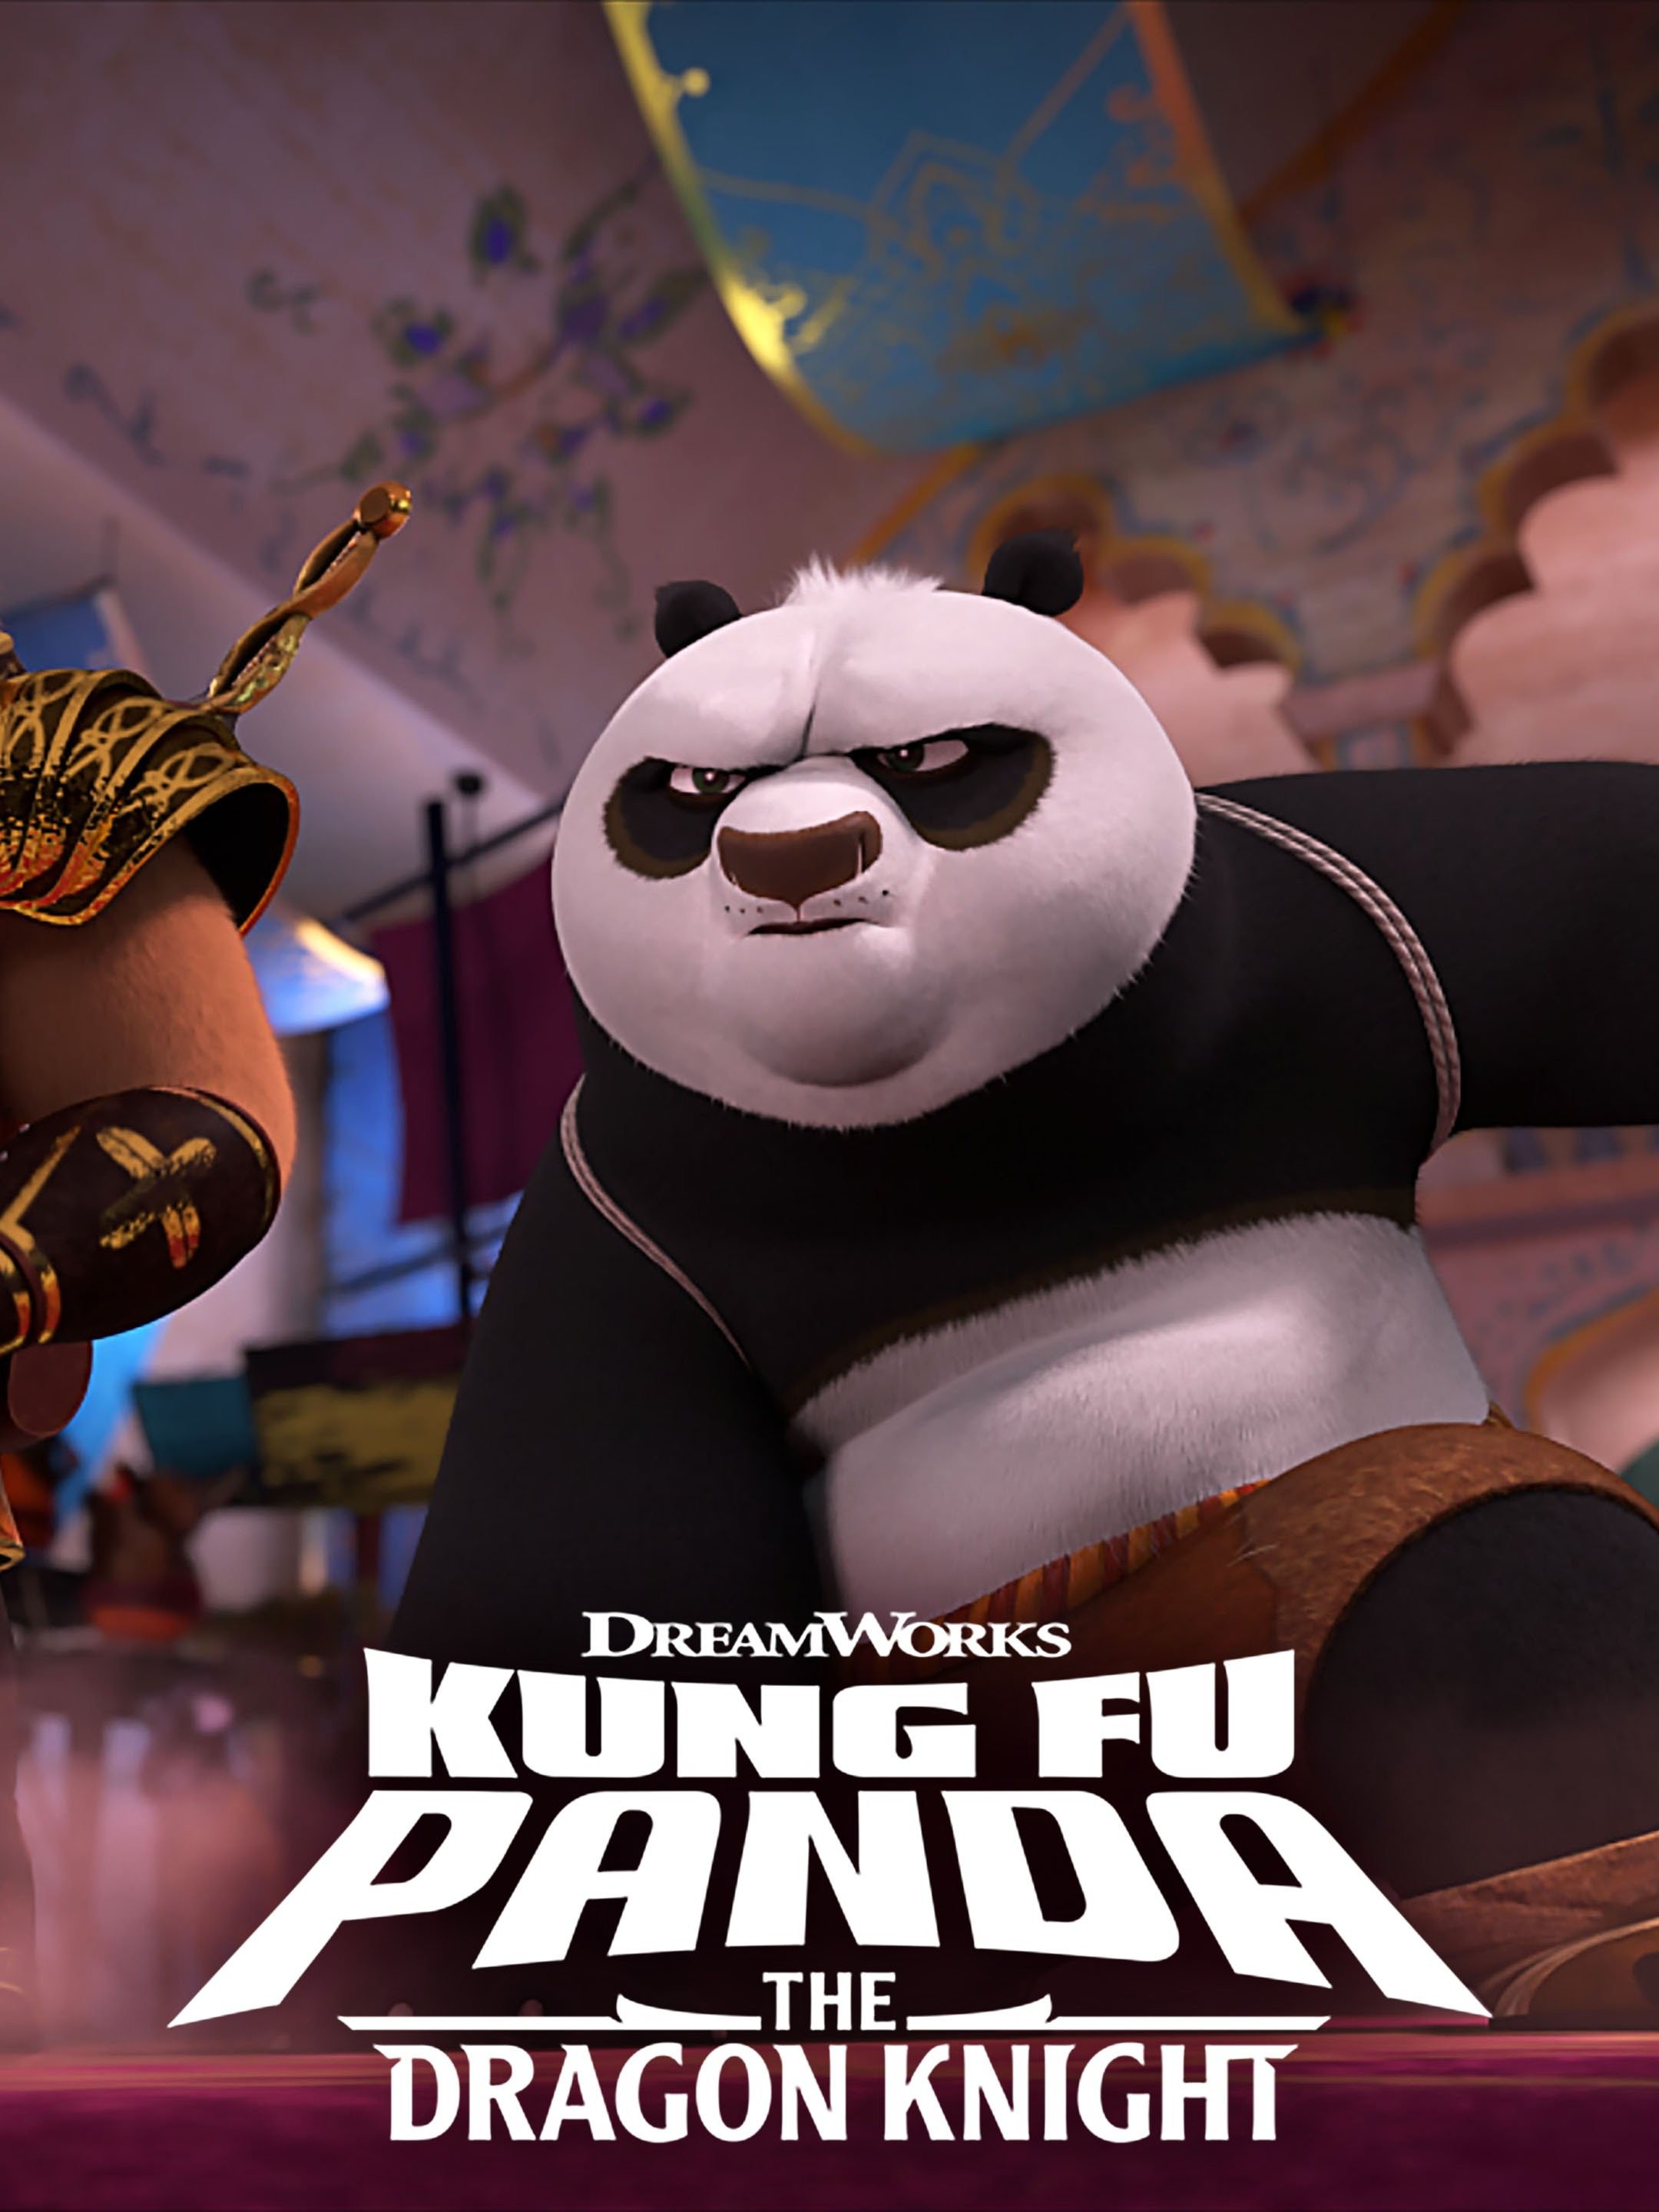 Kung Fu Panda is the greatest movie ever made., by Matt Dibble